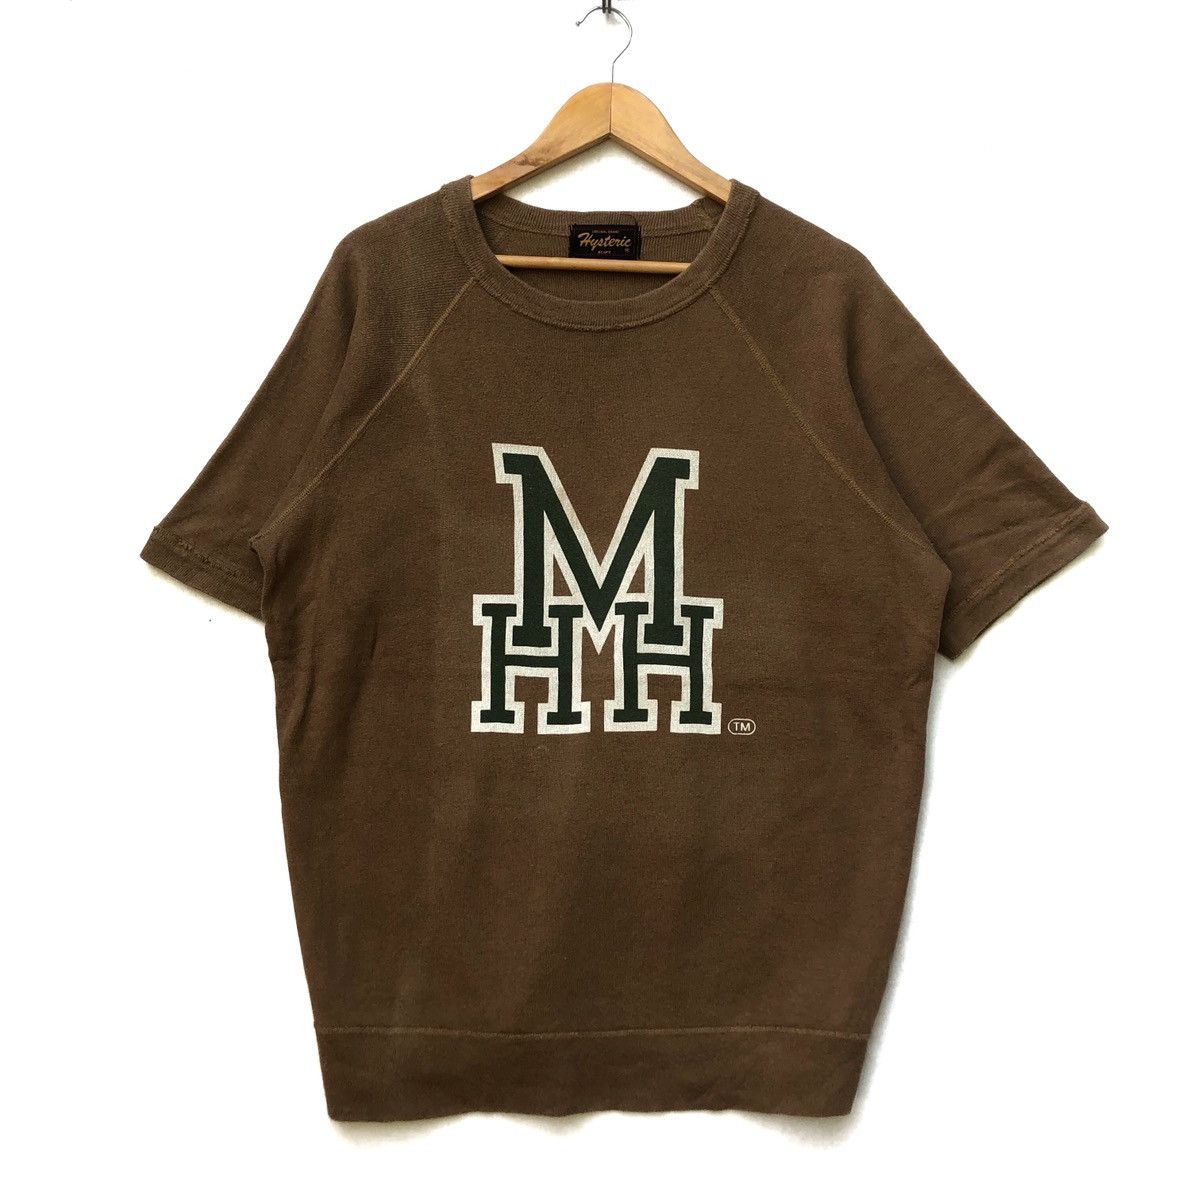 Hysteric Glamour Vintage Hysteric Glamour Heavy Metal Crewneck Size US M / EU 48-50 / 2 - 1 Preview